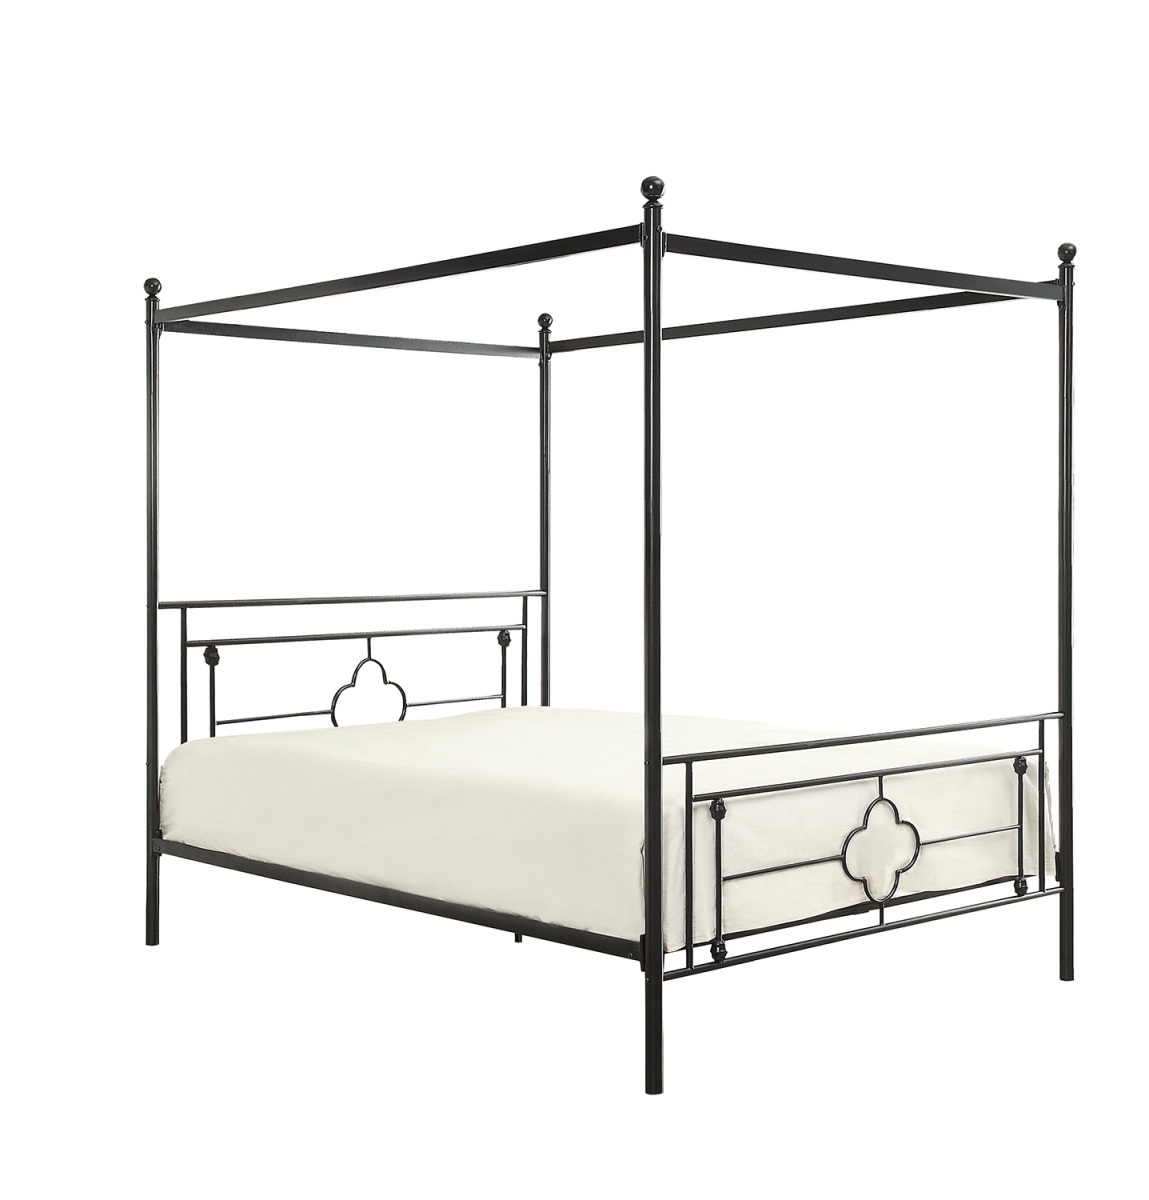 77 In. Queen Size Hosta Metal Canopy Platform Bed With Round Post - Vintage